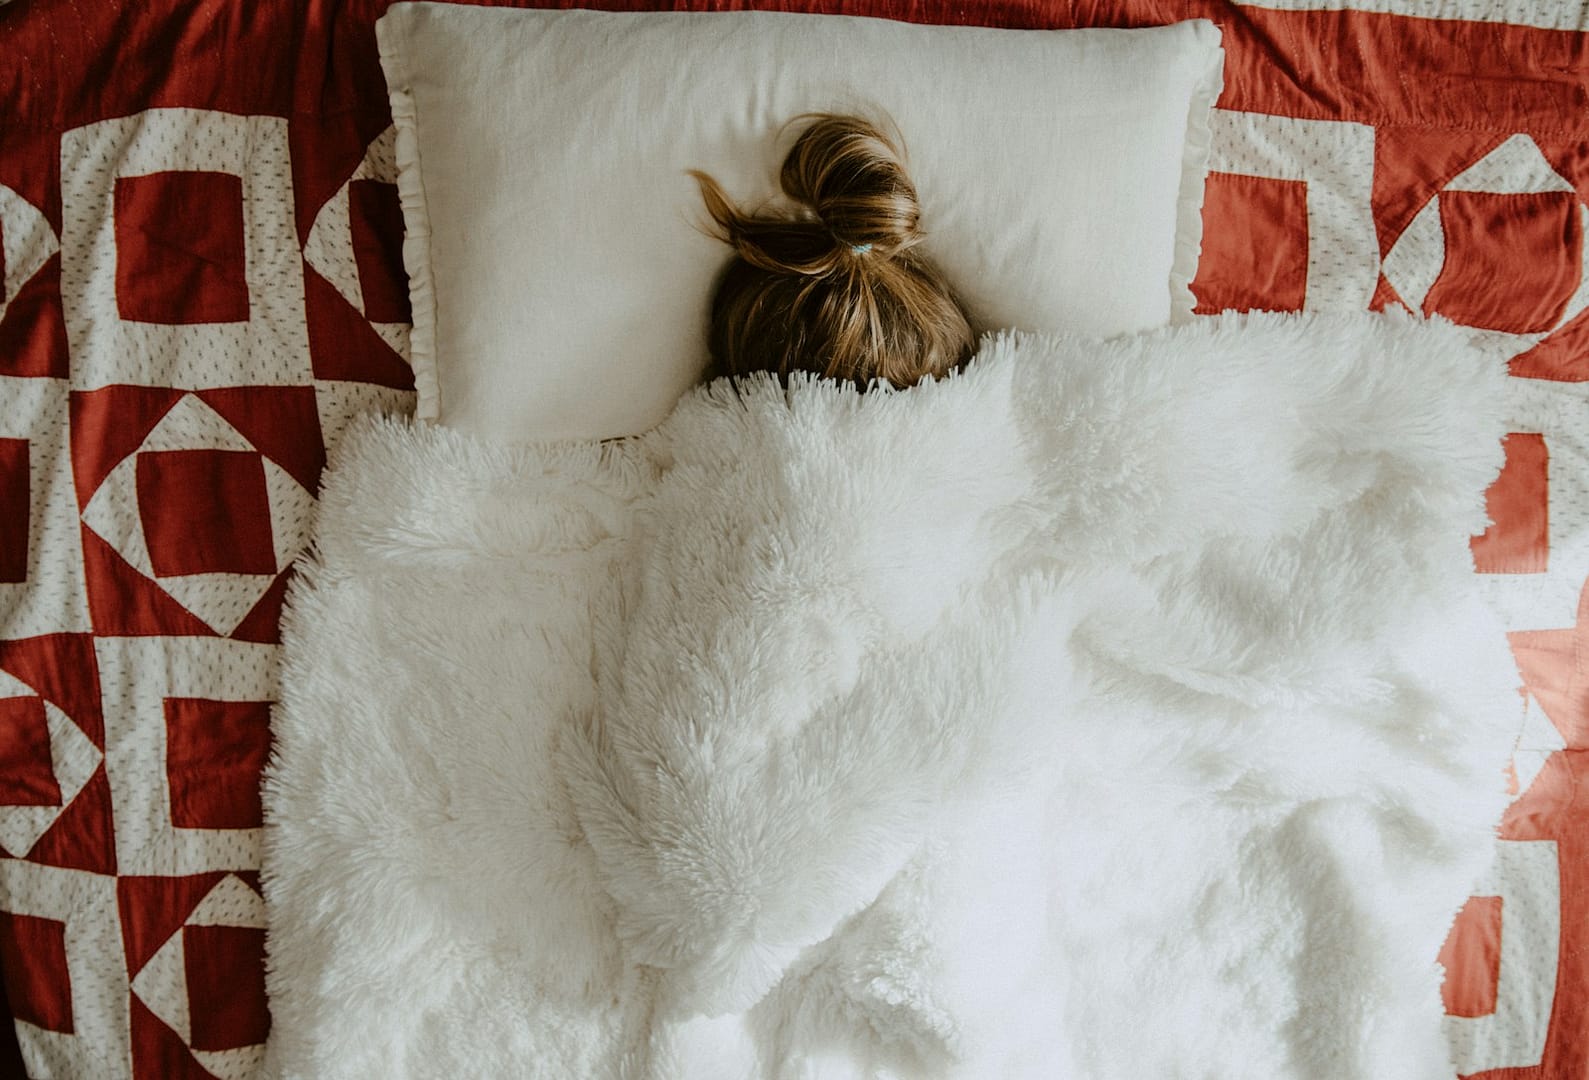 white fur textile on red and white textile with woman hiding under covers